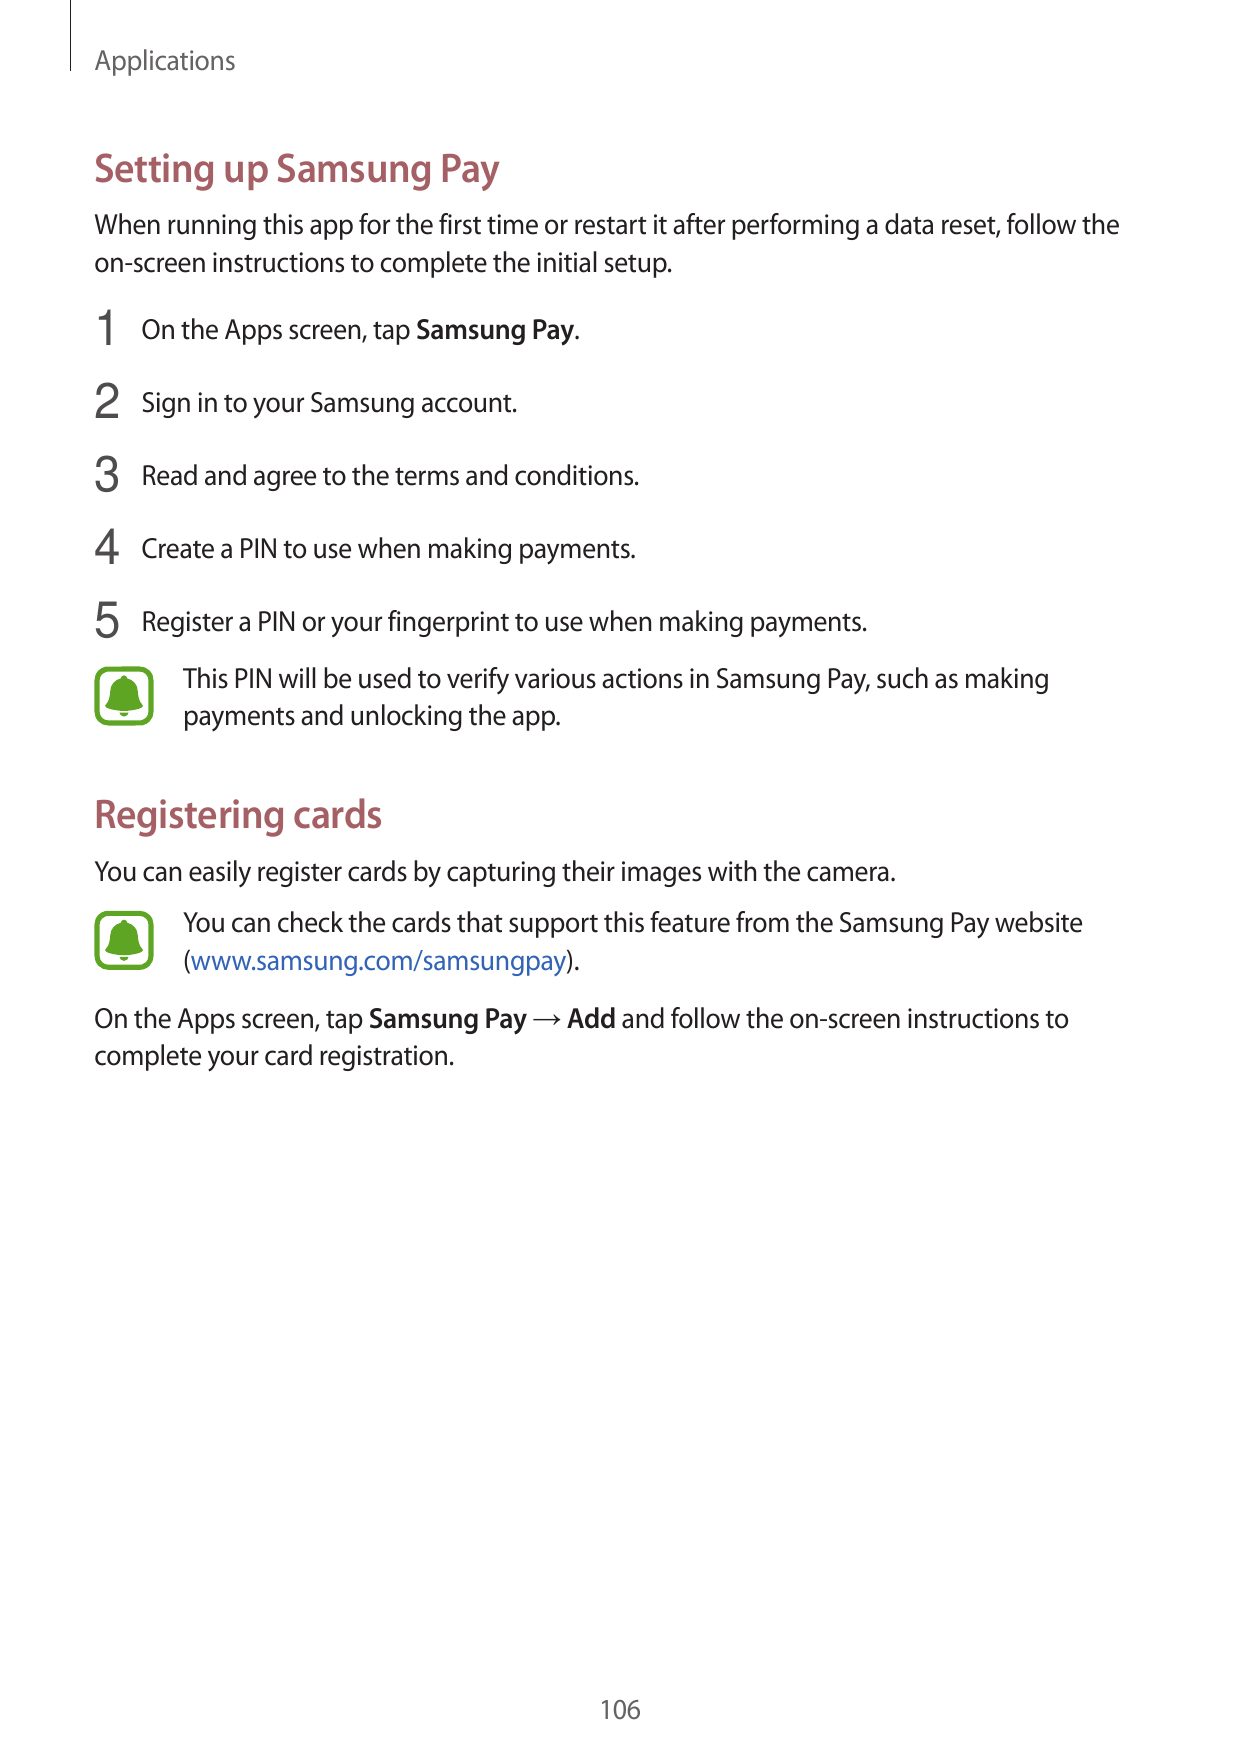 ApplicationsSetting up Samsung PayWhen running this app for the first time or restart it after performing a data reset, follow t